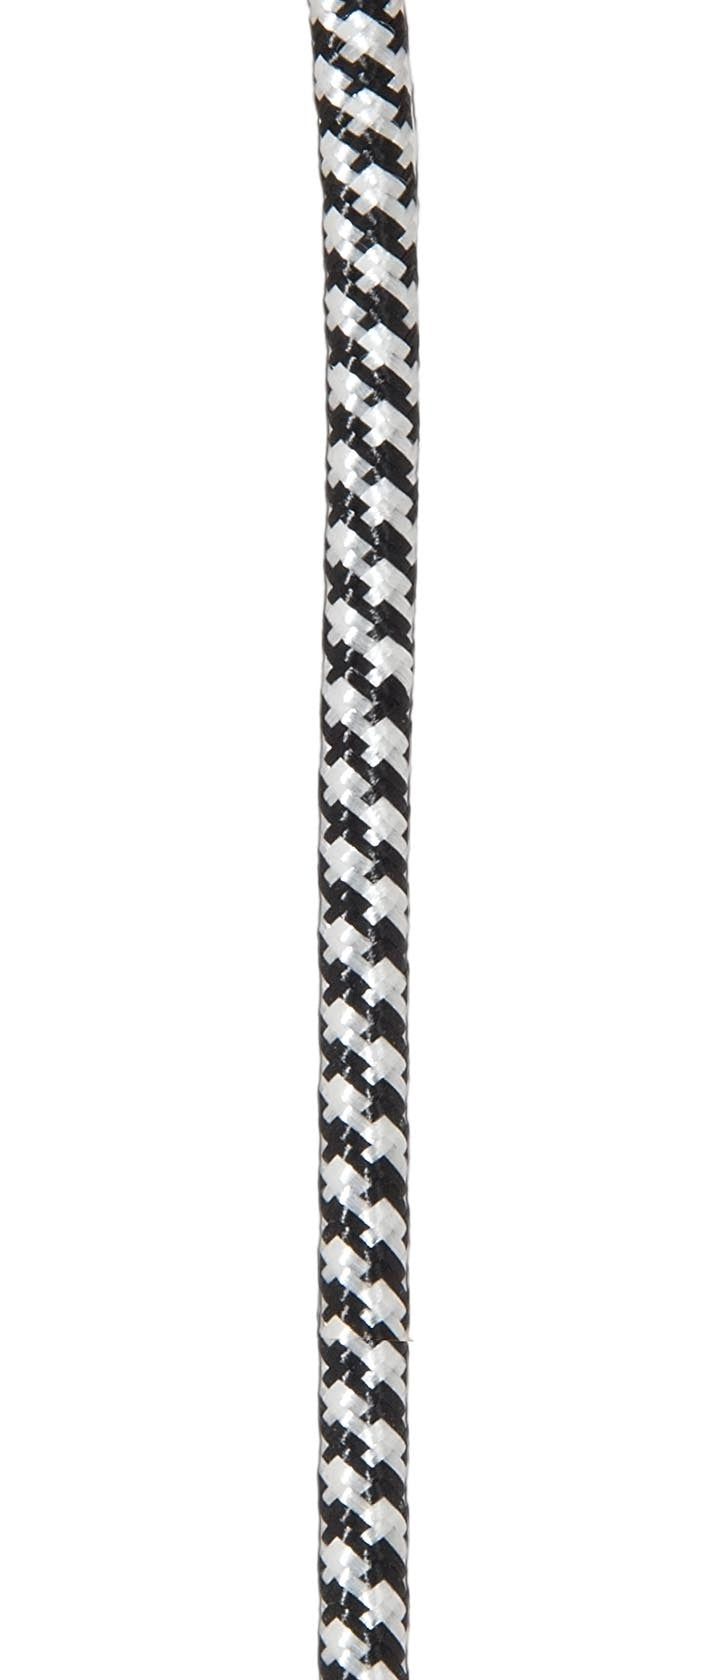 18/3 SVT-B Black and White Hounds-tooth Pattern Rayon Covered Parallel Fabric Lamp Cord - Choice of Length